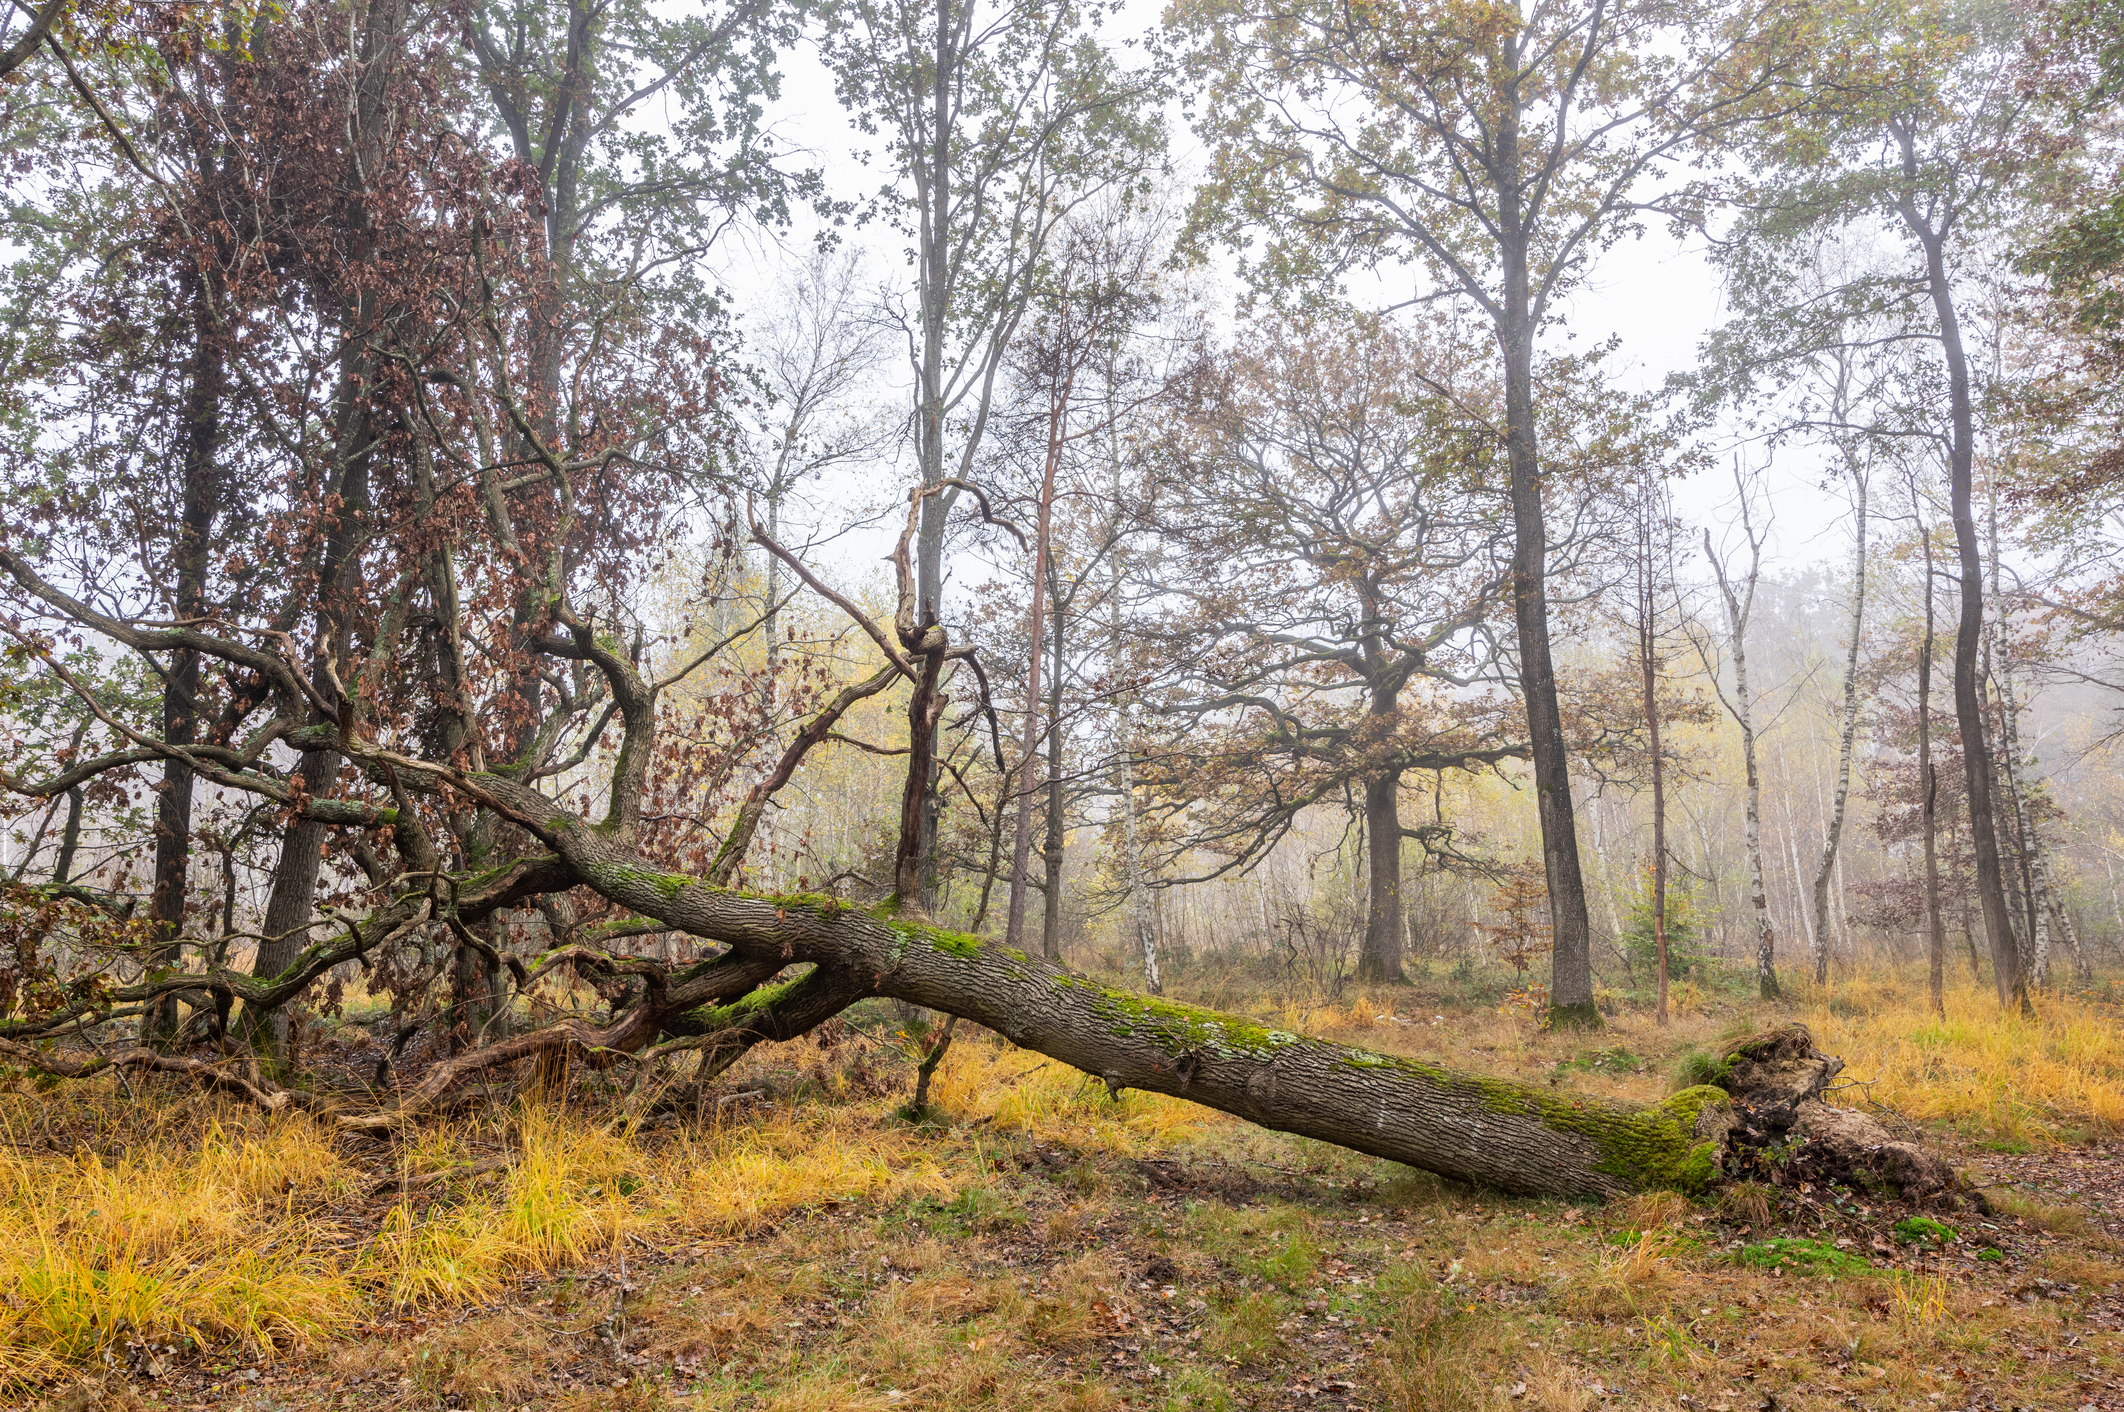 A fallen tree in a misty forest with bare and leafy trees around